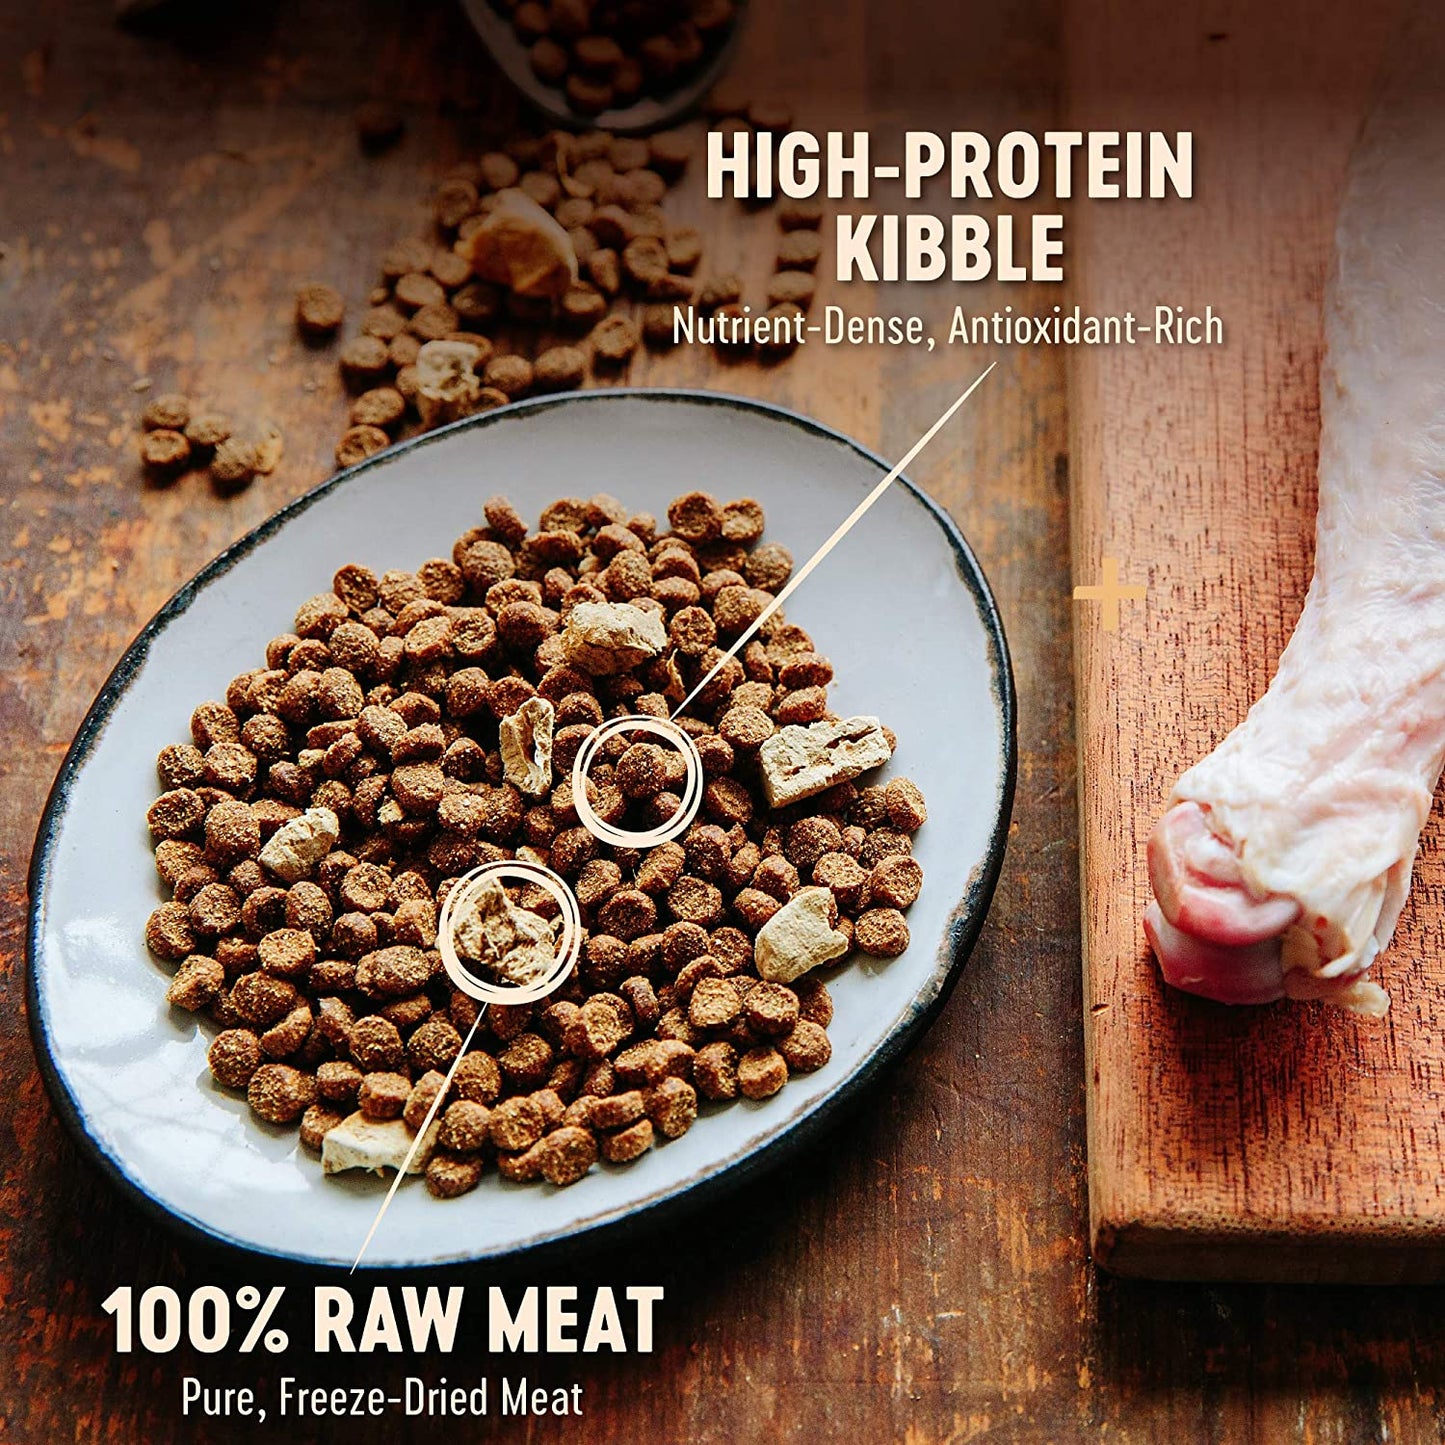 Wellness CORE Rawrev Grain-Free Indoor Recipe with Freeze-Dried Turkey Liver Dry Cat Food